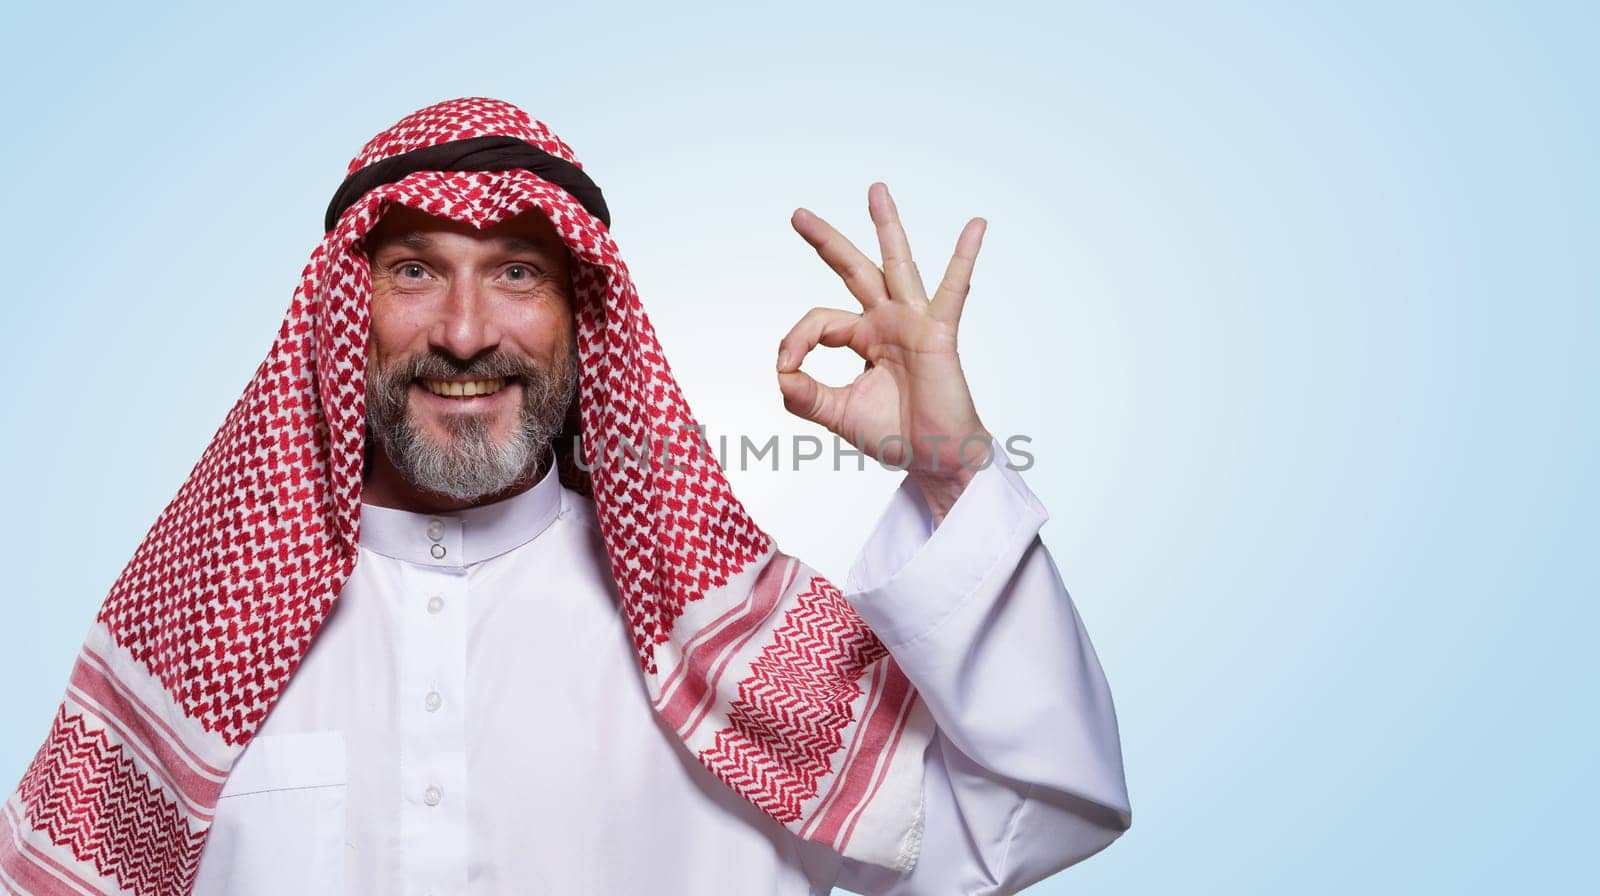 Cheerful and confident Arab man smiles warmly and shows OK sign against light blue background, leaving space for text. Approval, and contentment, making versatile choice for various messaging needs. High quality photo